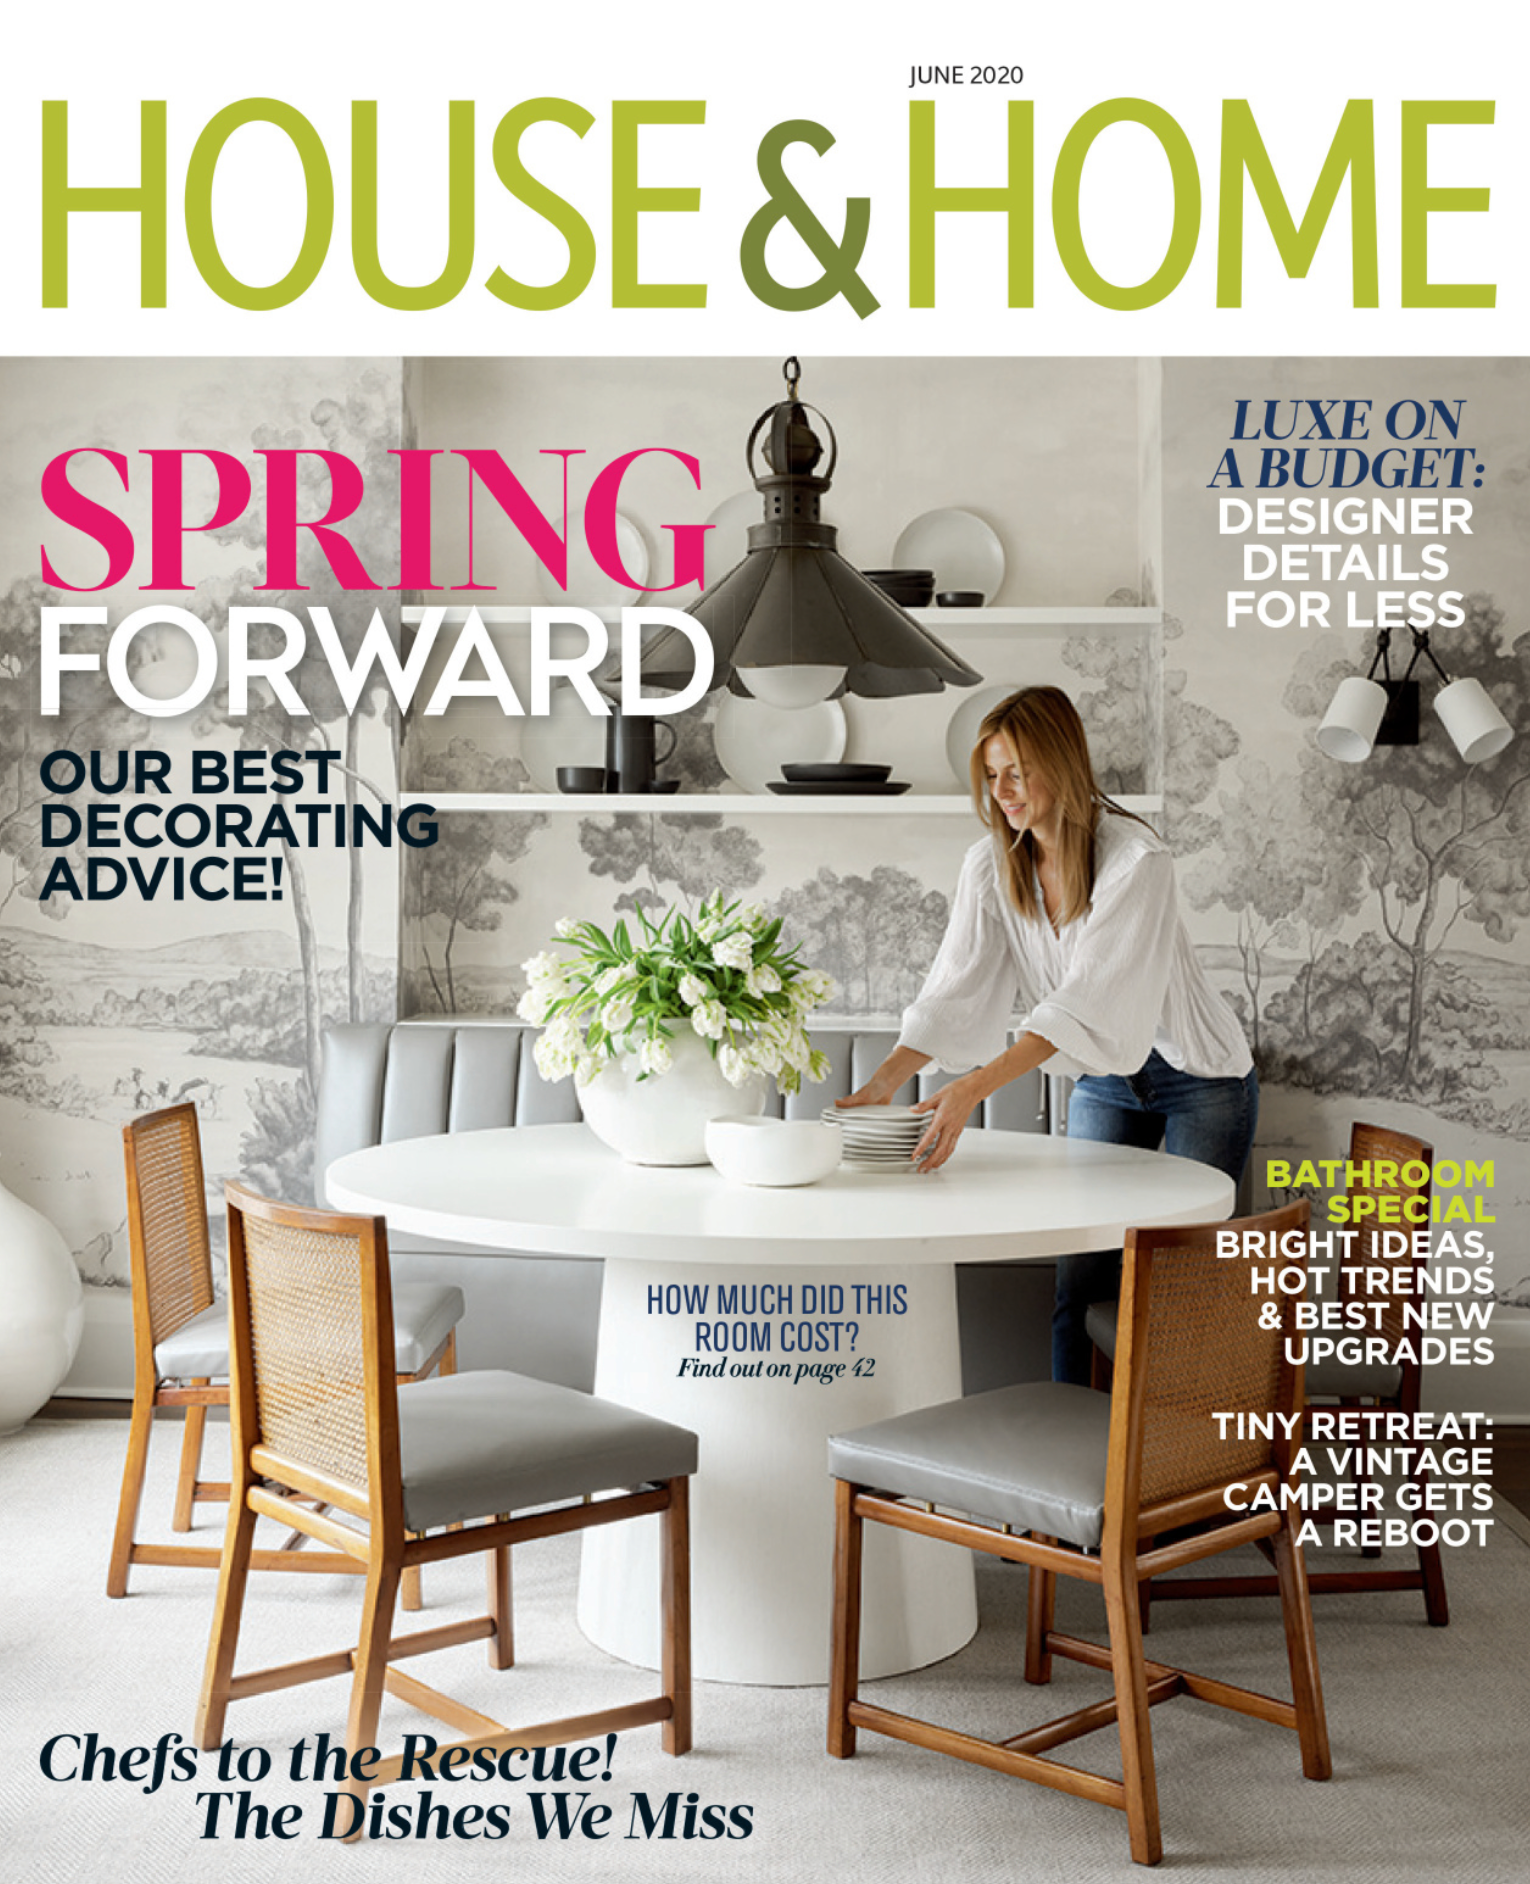 House & Home June 2020